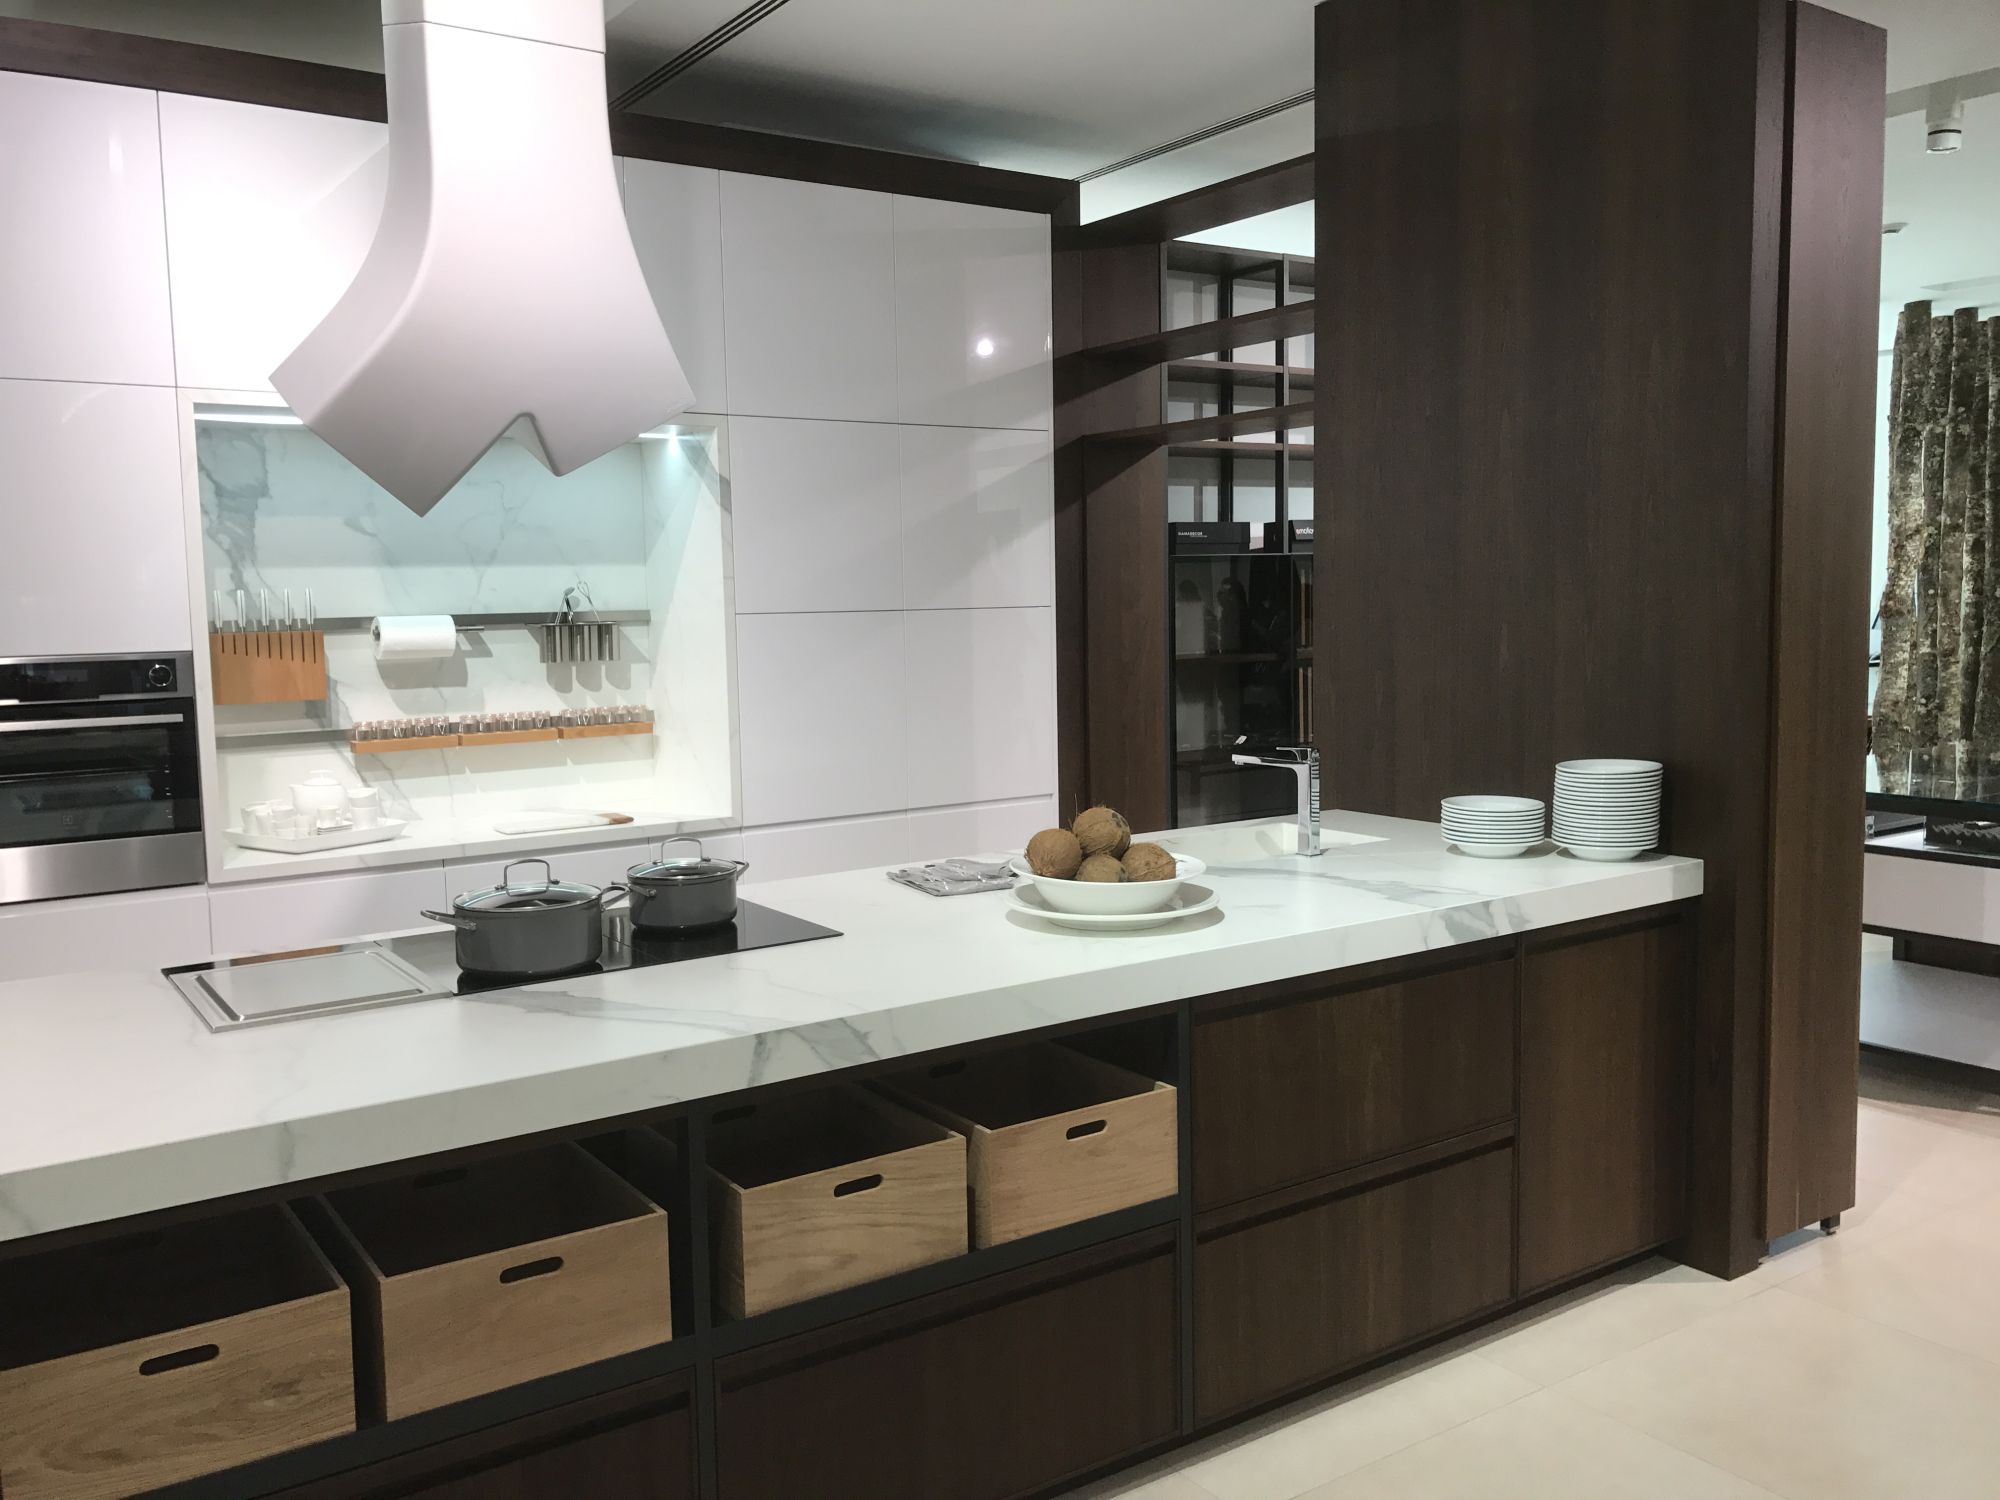 Wood looking tiles, marble top and white finishes - GamaDecor kitchen